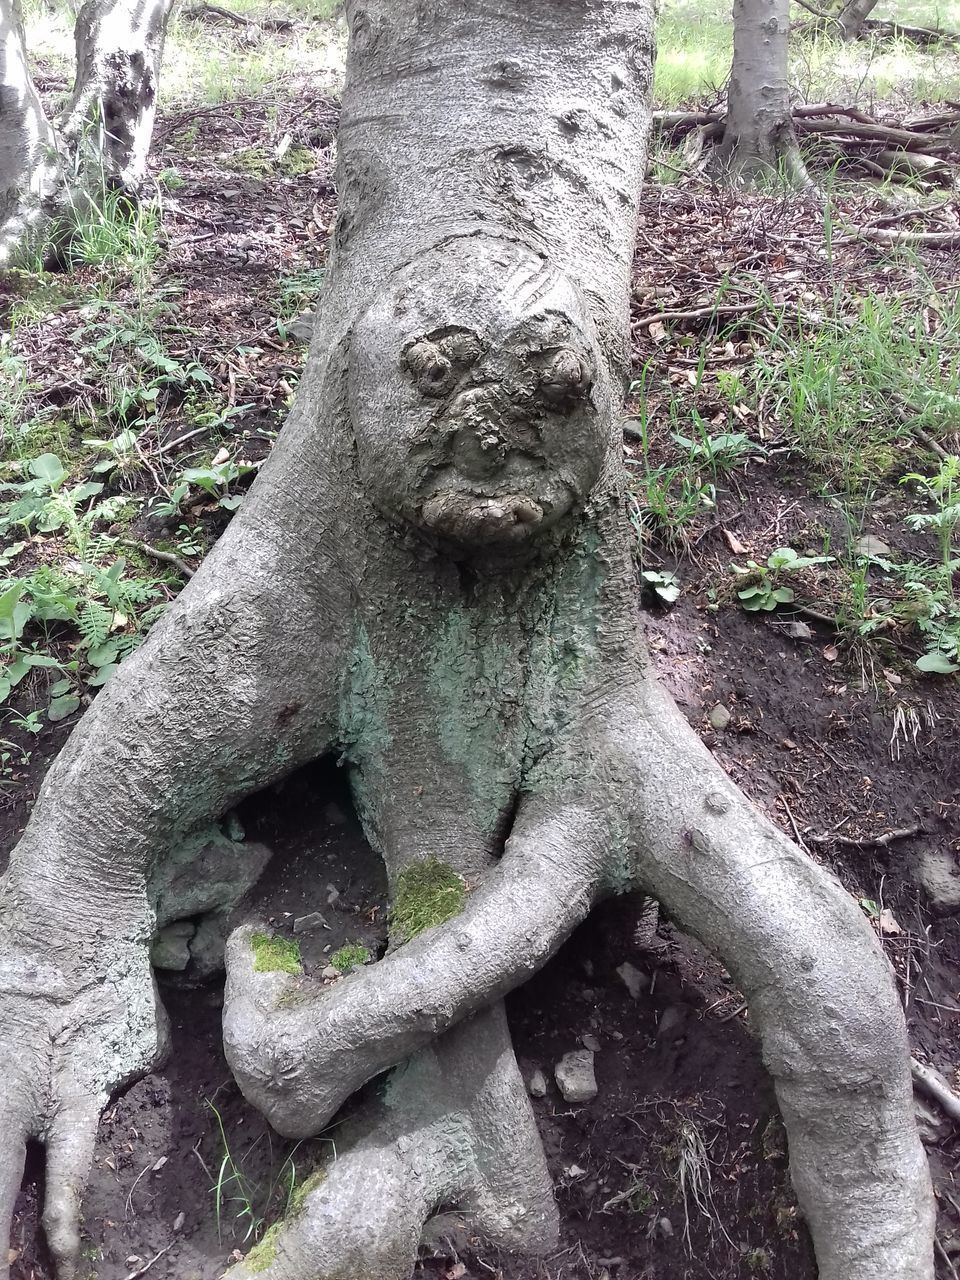 CLOSE-UP OF OLD STATUE AGAINST TREE TRUNK